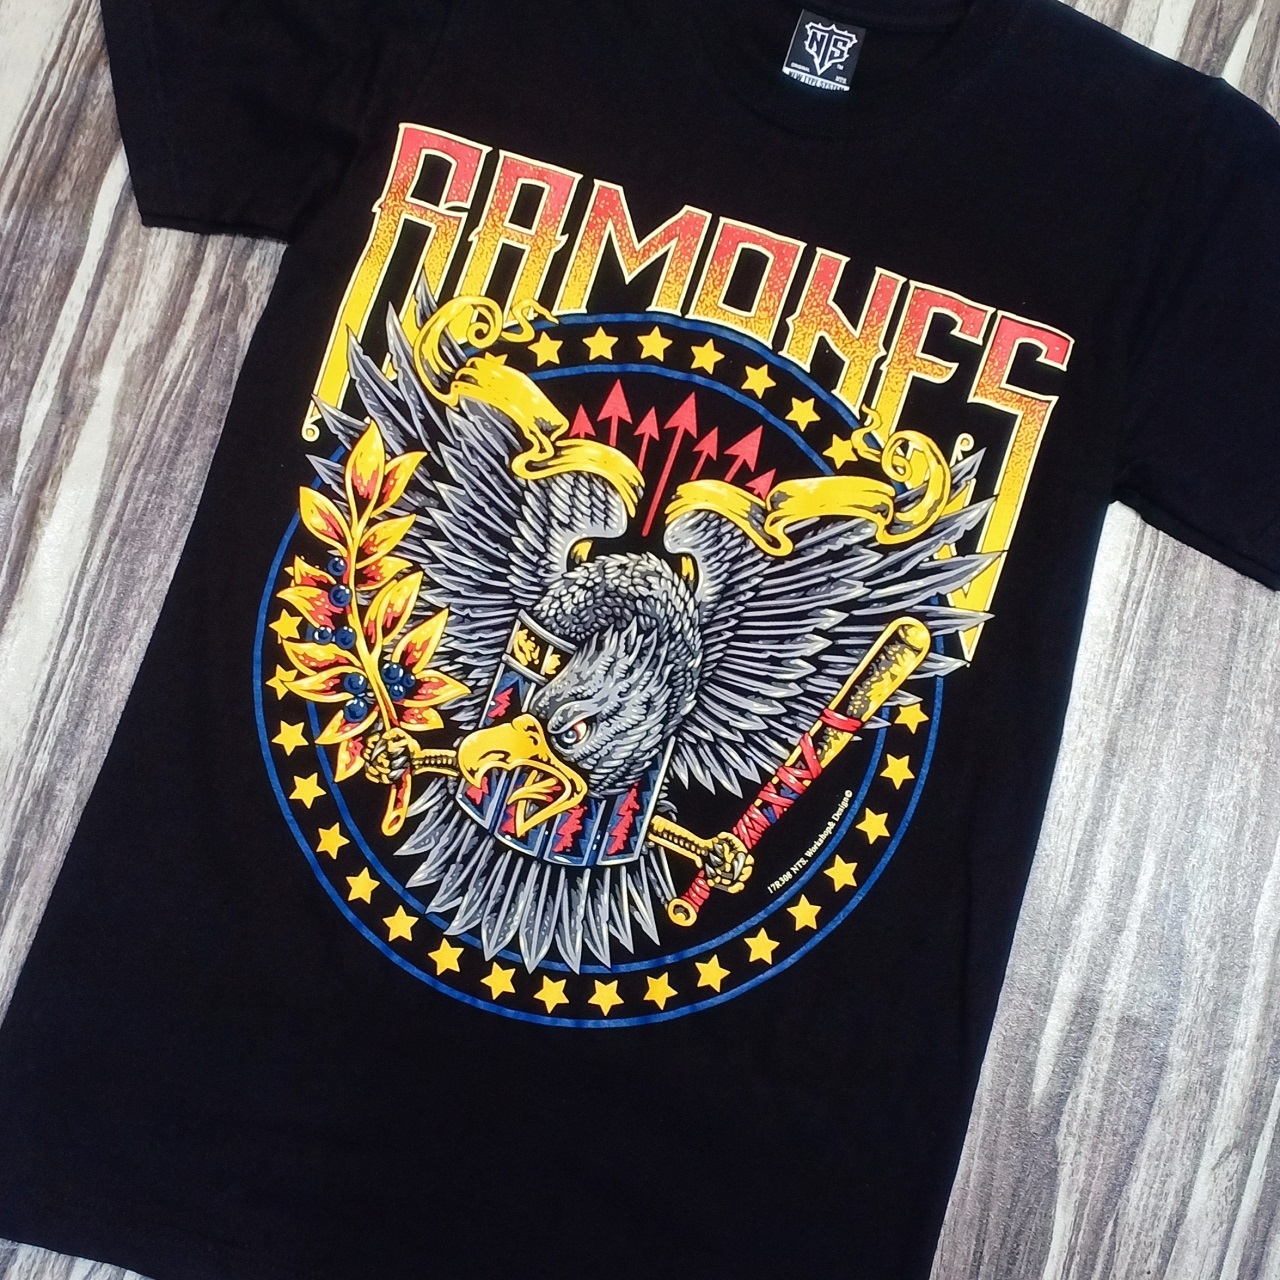 17R308 RAMONES AMERICAN PUNK ROCK BAND LOGO EAGLE LIMITED COLOR EDITION NTS  ORIGINAL NEW TYPE SYSTEM COTTON T-SHIRT – PREMIUM GRADE BLACK TIMBER NEW  TYPE SYSTEM MOAI SPEED HIGH QUALITY SILK SCREEN